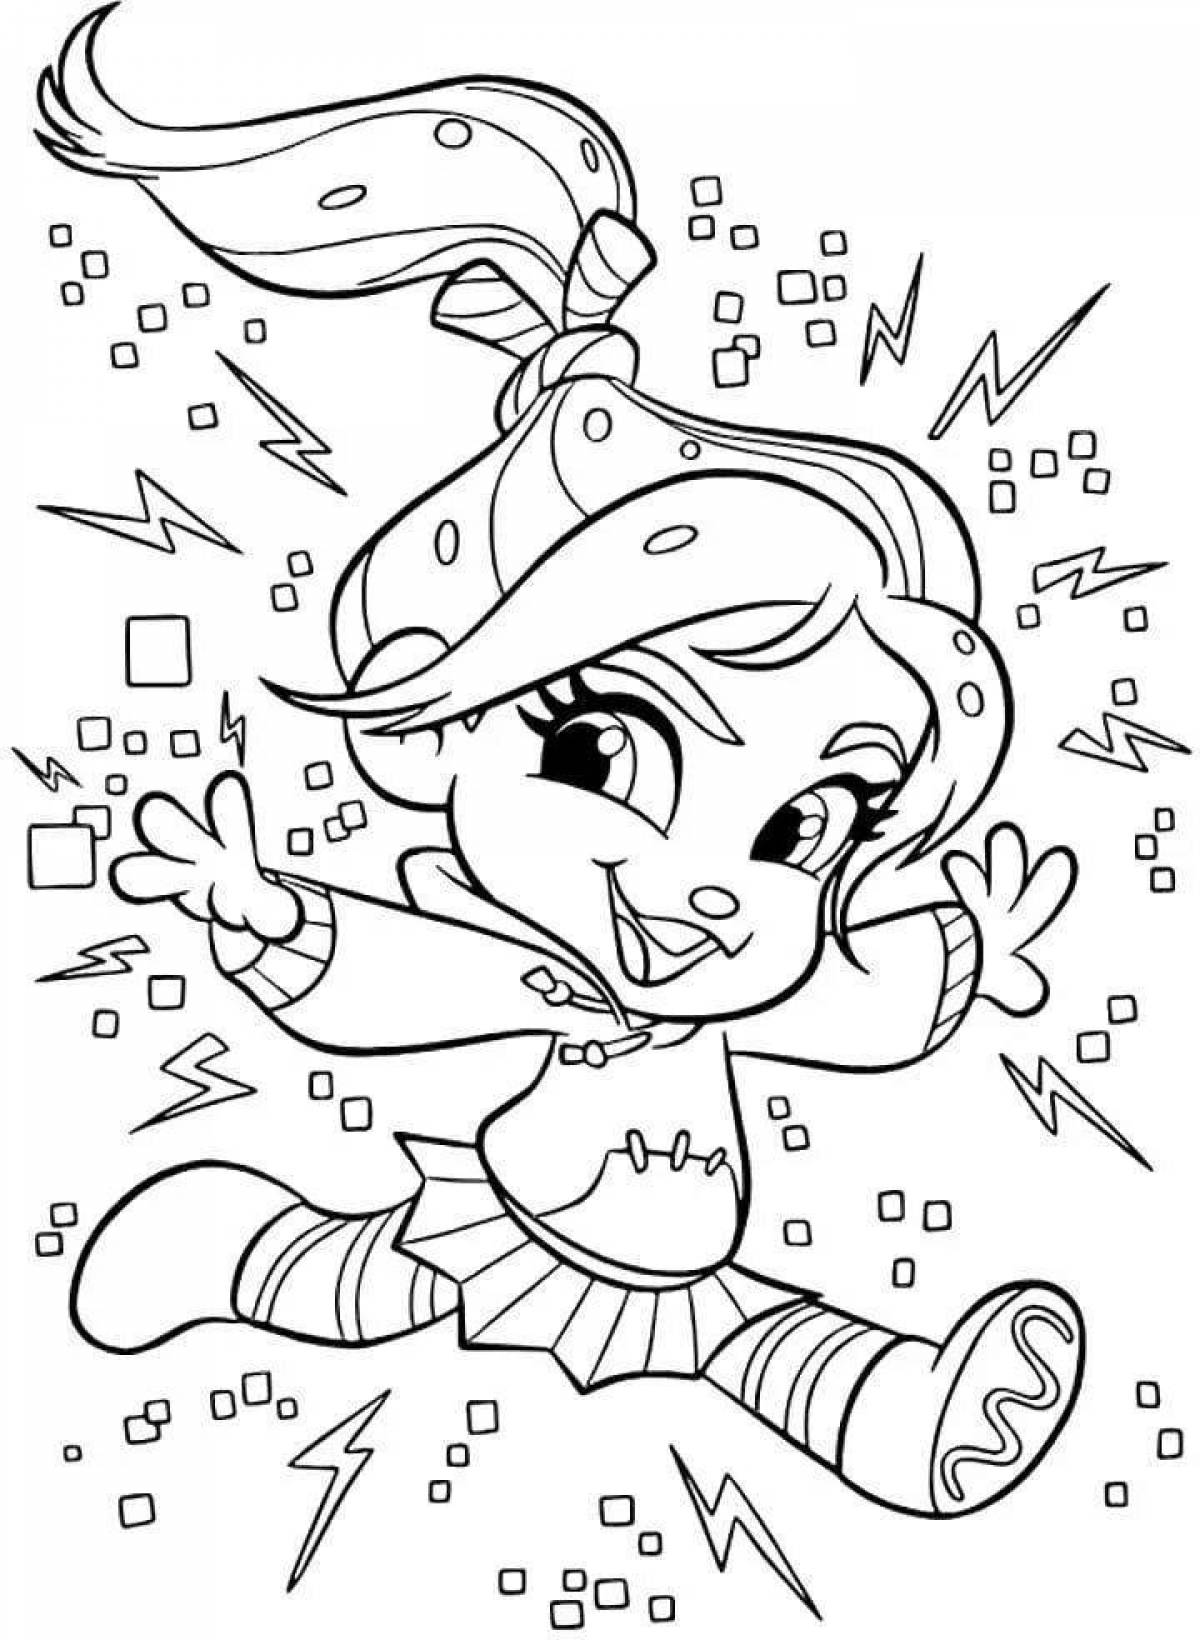 Playful cartoon coloring book for girls 5-6 years old